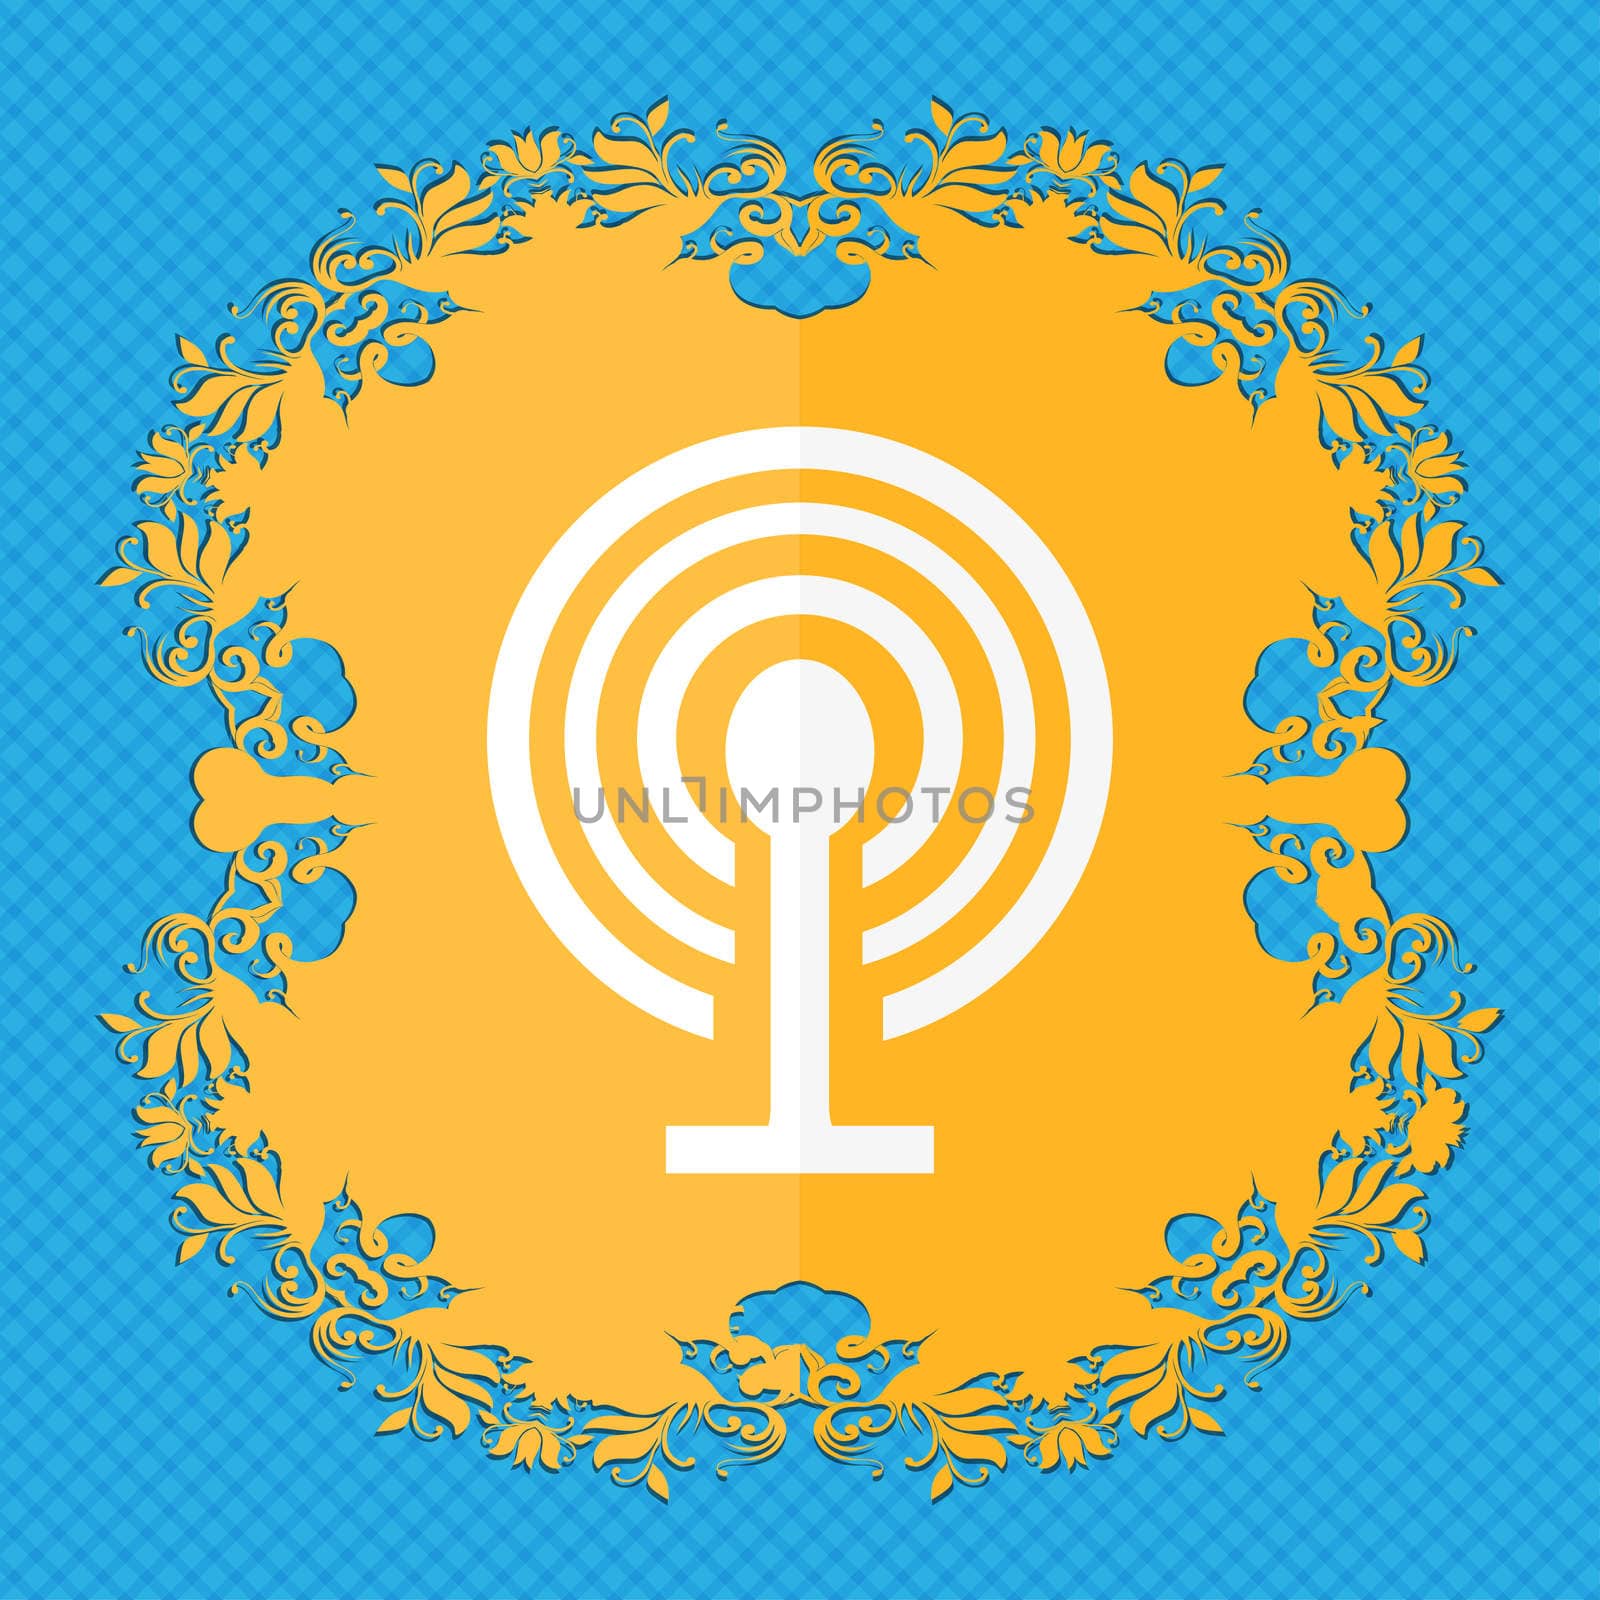 Wifi sign. Wi-fi symbol. Wireless Network icon zone. Floral flat design on a blue abstract background with place for your text. illustration